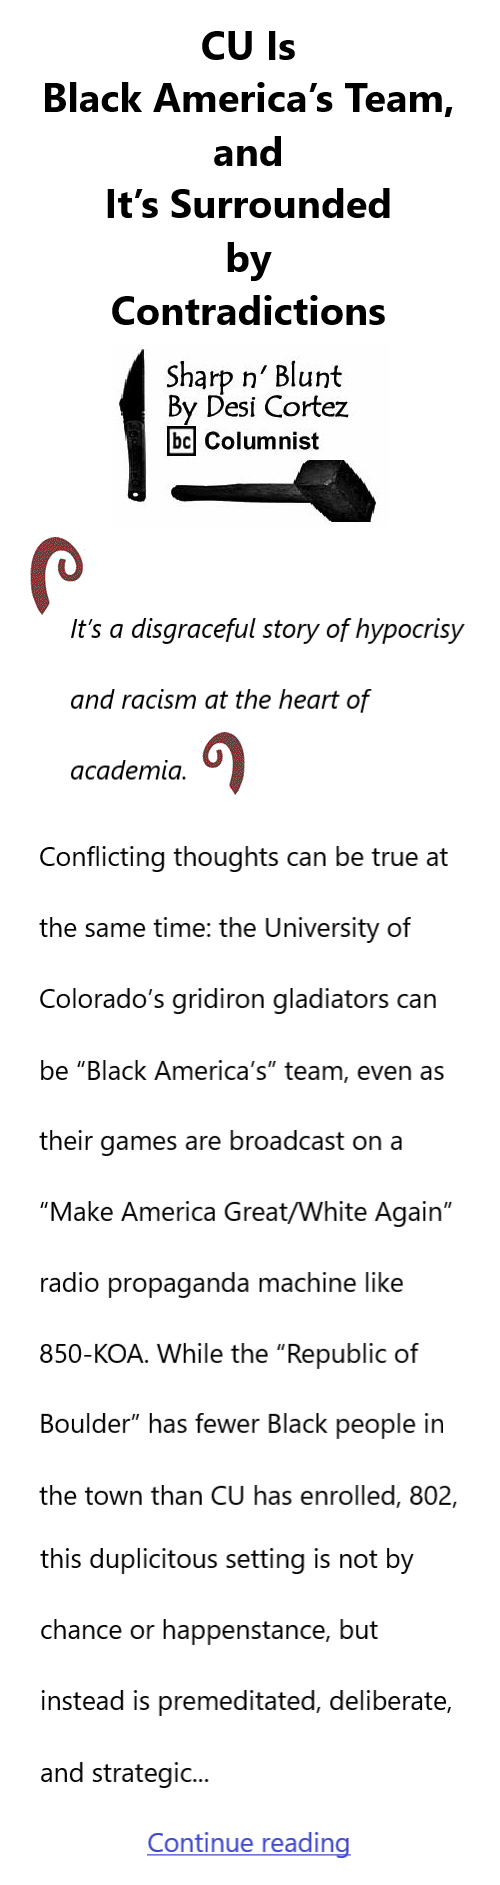 BlackCommentator.com Oct 12, 2023 - Issue 973: CU Is Black America’s Team, and It’s Surrounded by Contradictions - Sharp n' Blunt By Desi Cortez, BC Columnist